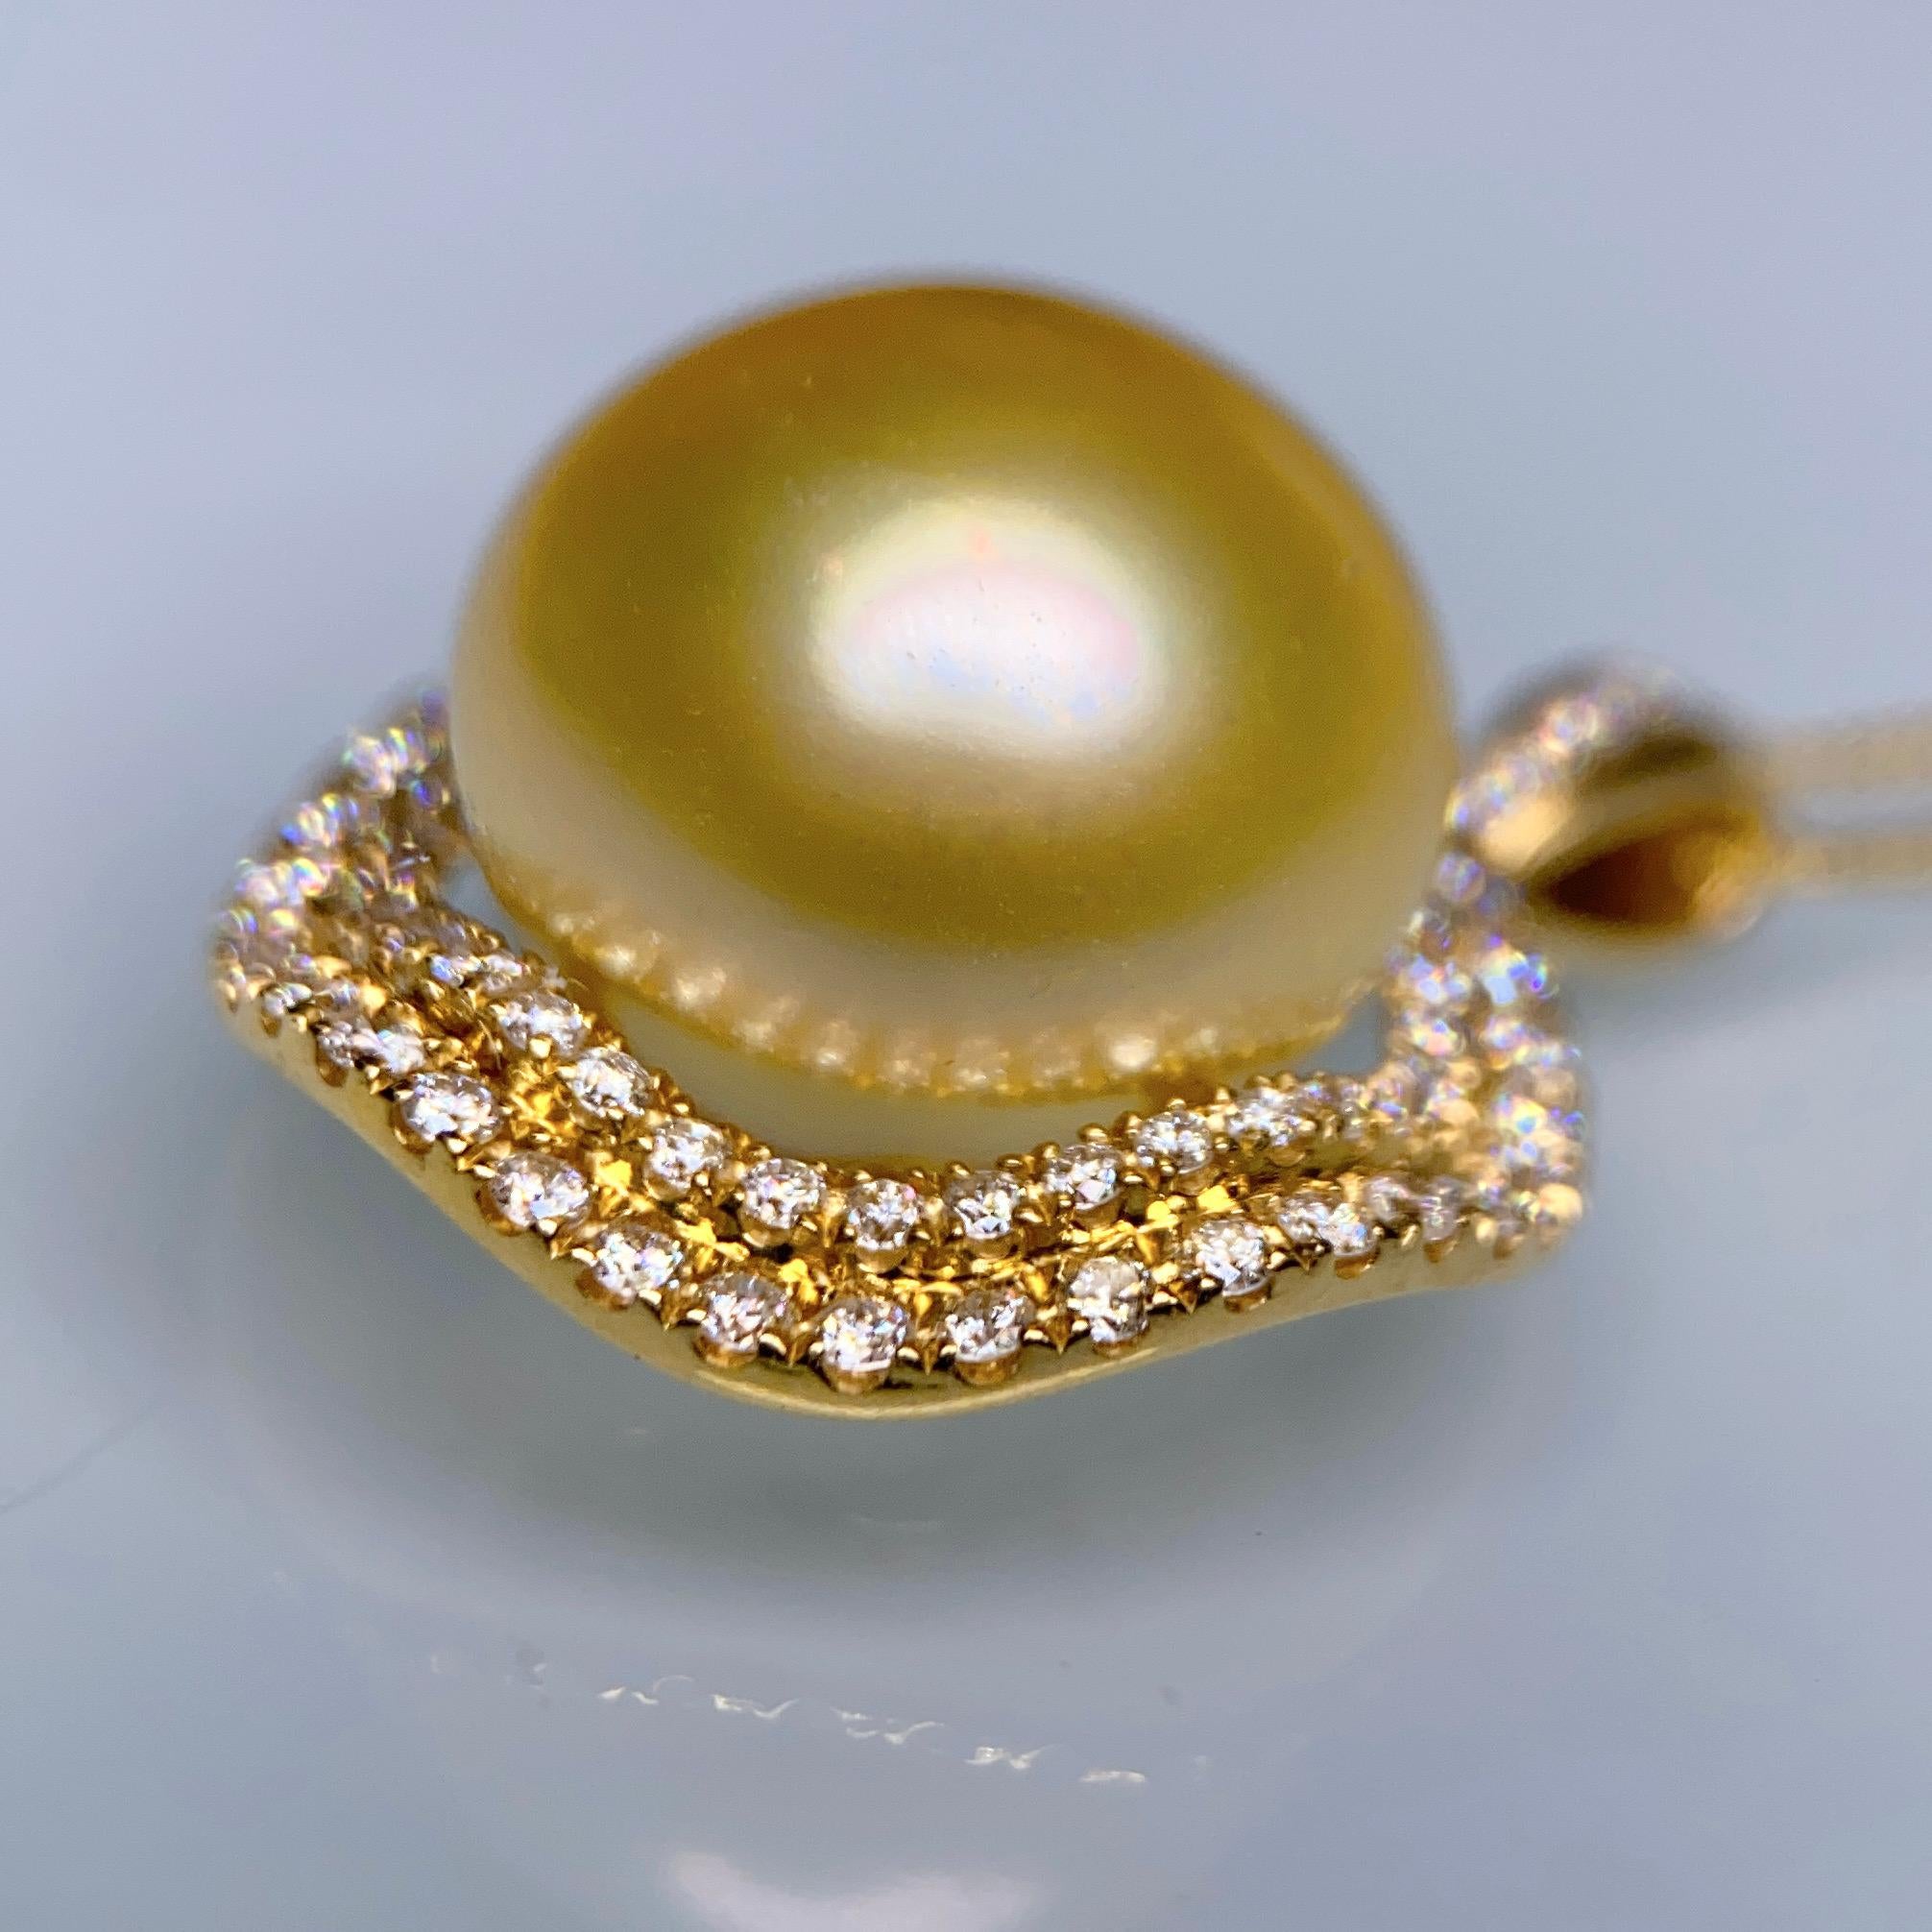 A 14.4 mm Light Golden Colour South Sea Pearl and Diamond Pendant in 18k Yellow Gold
It consists of a Button Shape South Sea Pearl with Very Good Lustre and Very Minor Surface Blemish
The Pearl is Light Gold in colour with Green Overtone 
Total